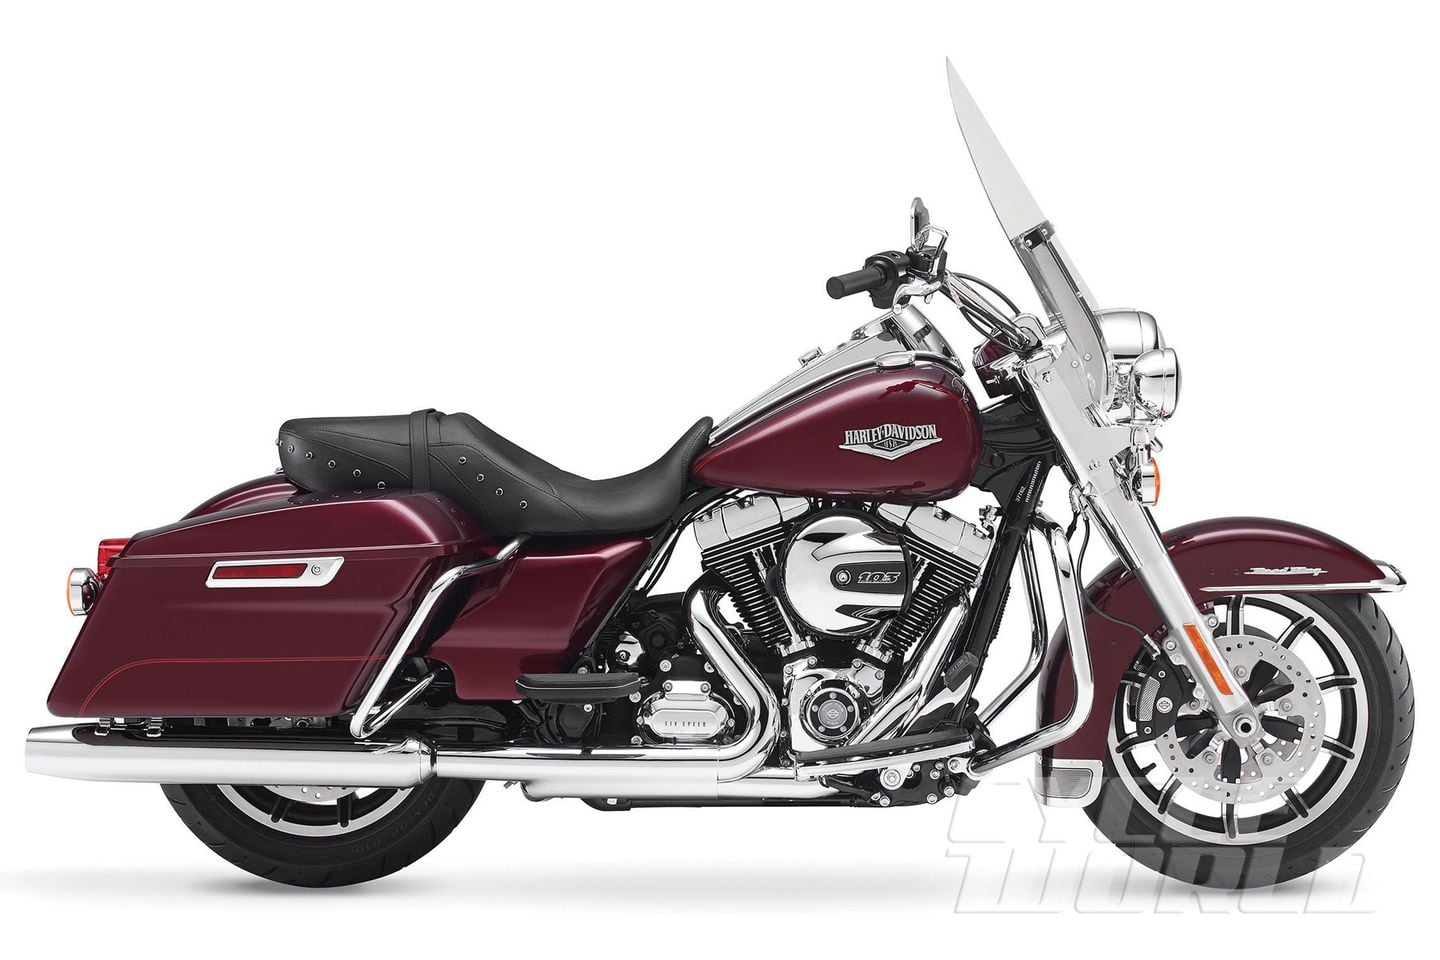 2014 Harley Davidson Project Rushmore First Look Review Photos Cycle World